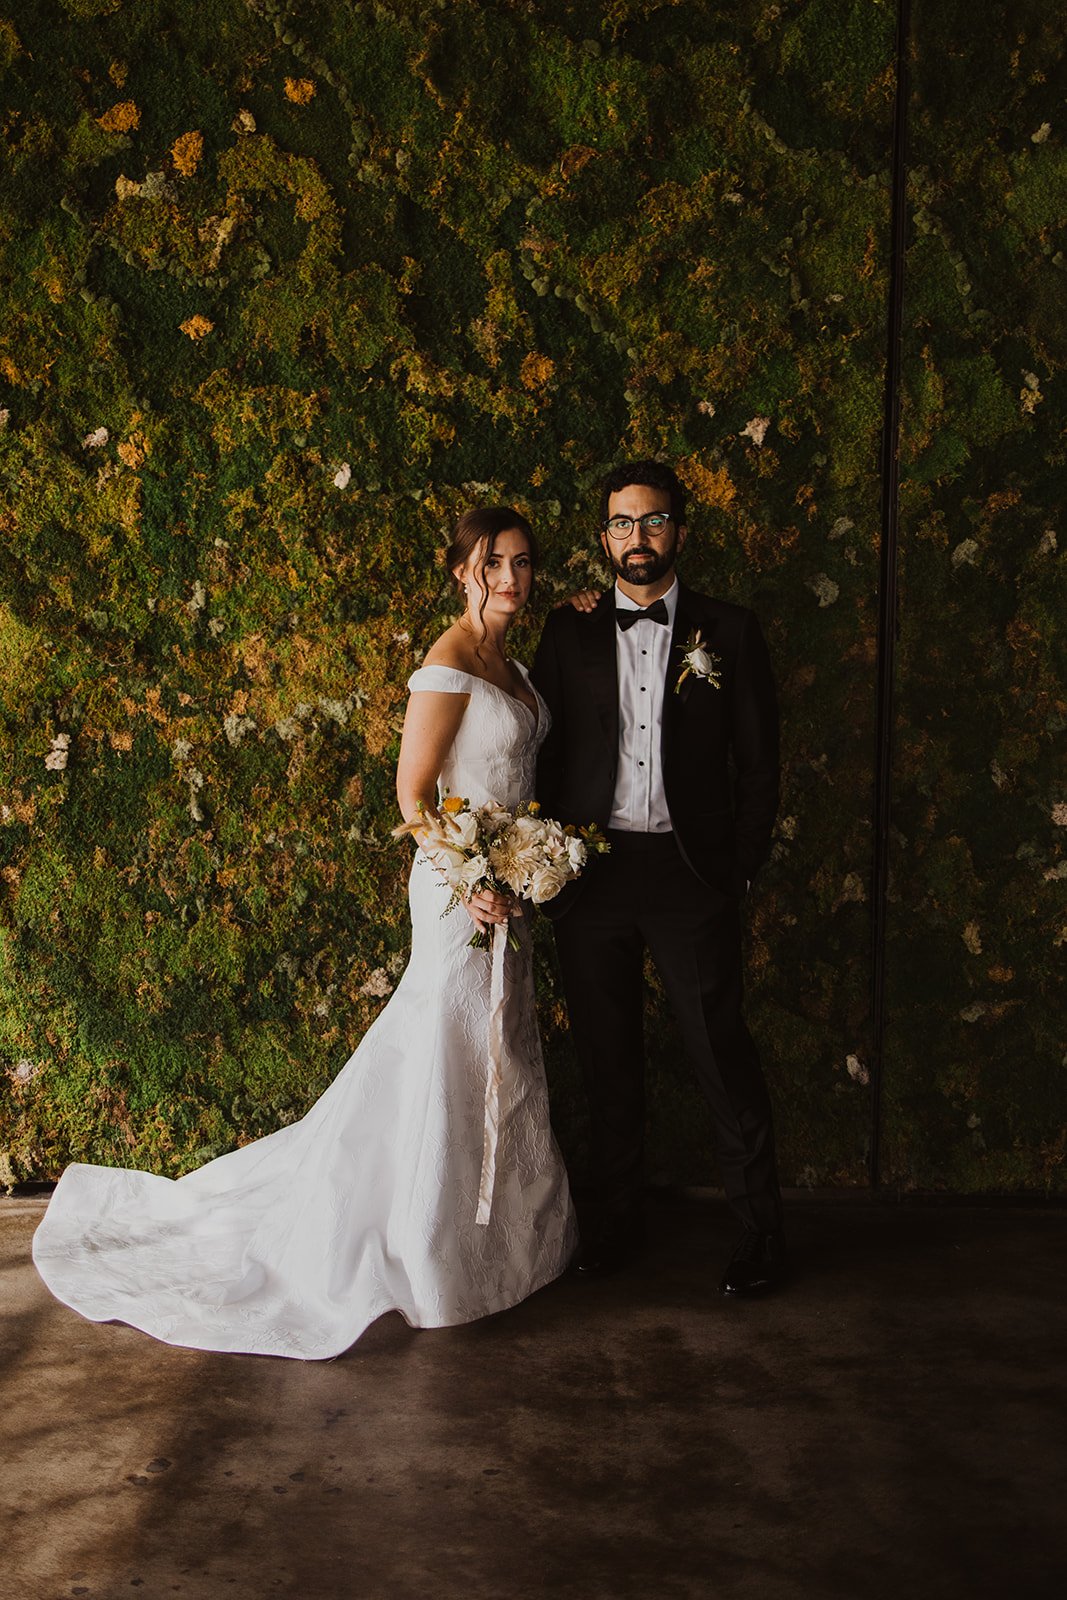  Anne Barge Anne Barge Bridal Anne Barge Frankie fitted gown off the shoulder wedding gown Denver wedding Colorado wedding yellow florals fall flowers 